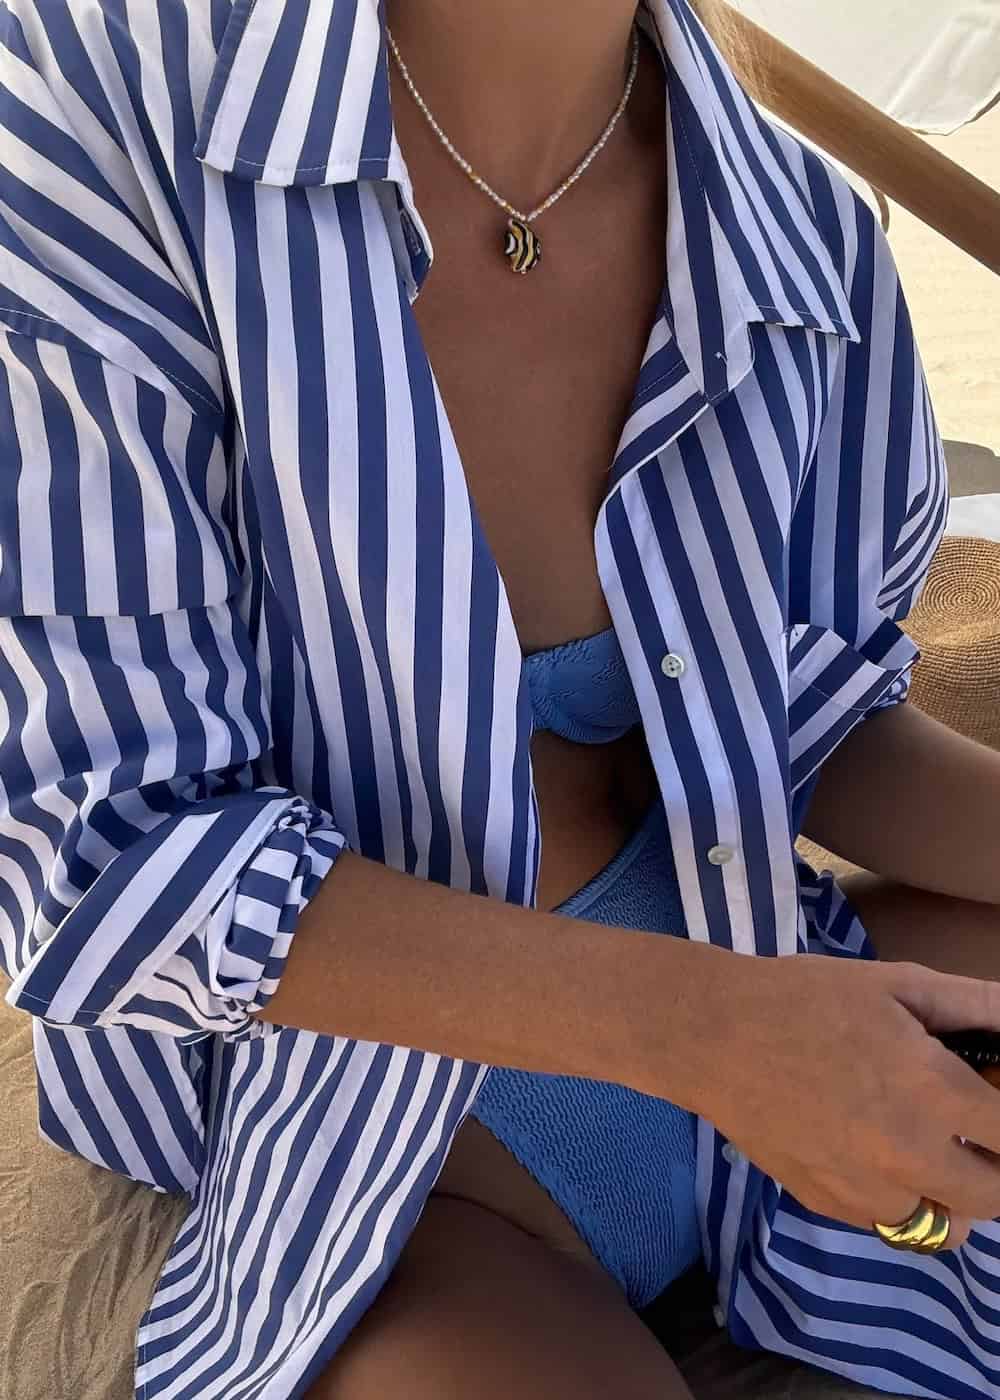 a woman wearing a blue bikini and an oversized striped blue and white button-up